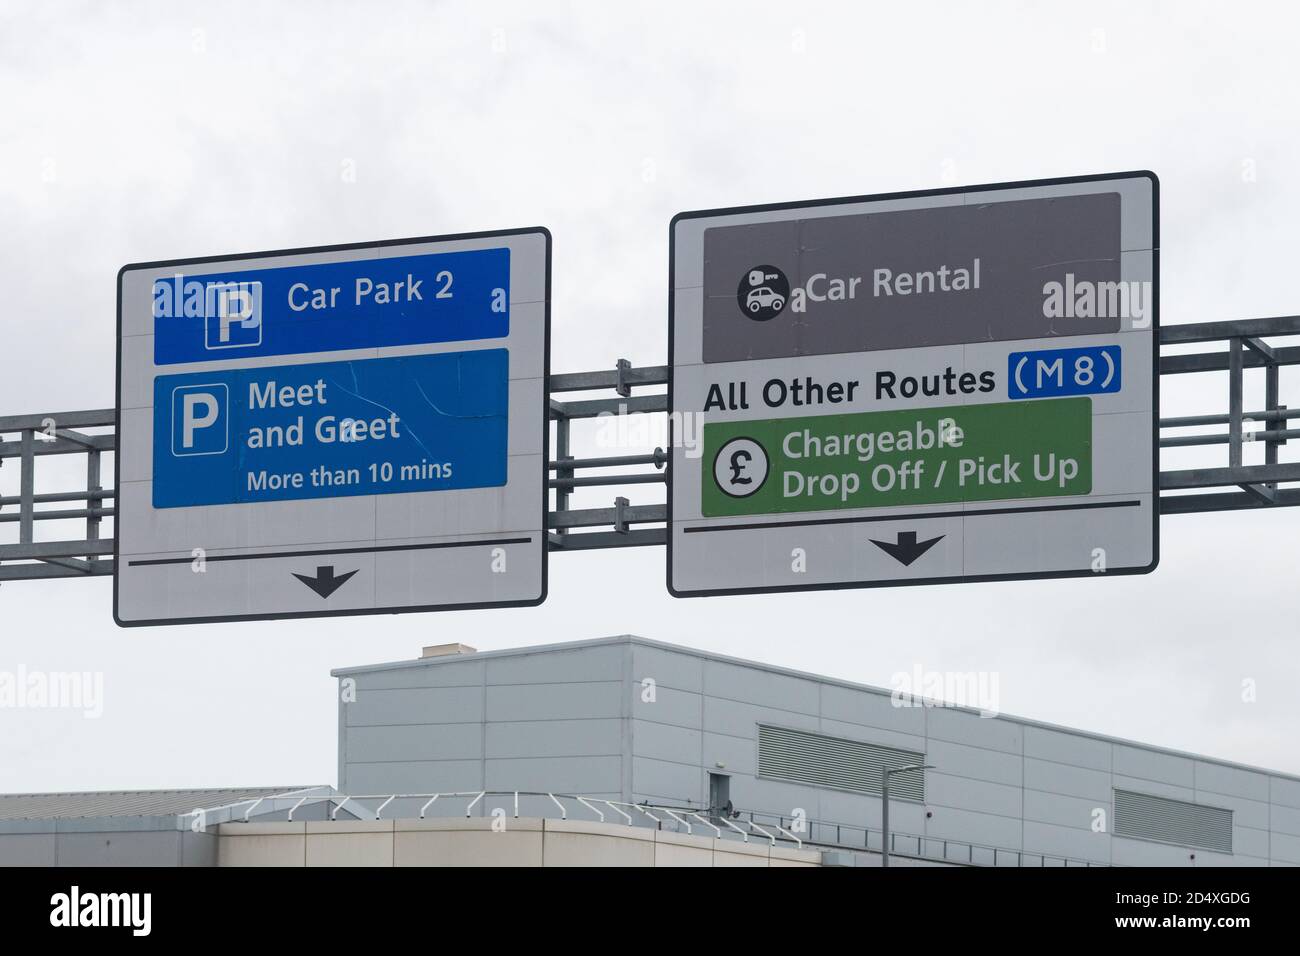 Glasgow Airport chargeable drop off / pick up sign and meet and greet signs, Glasgow, Scotland, UK Stock Photo